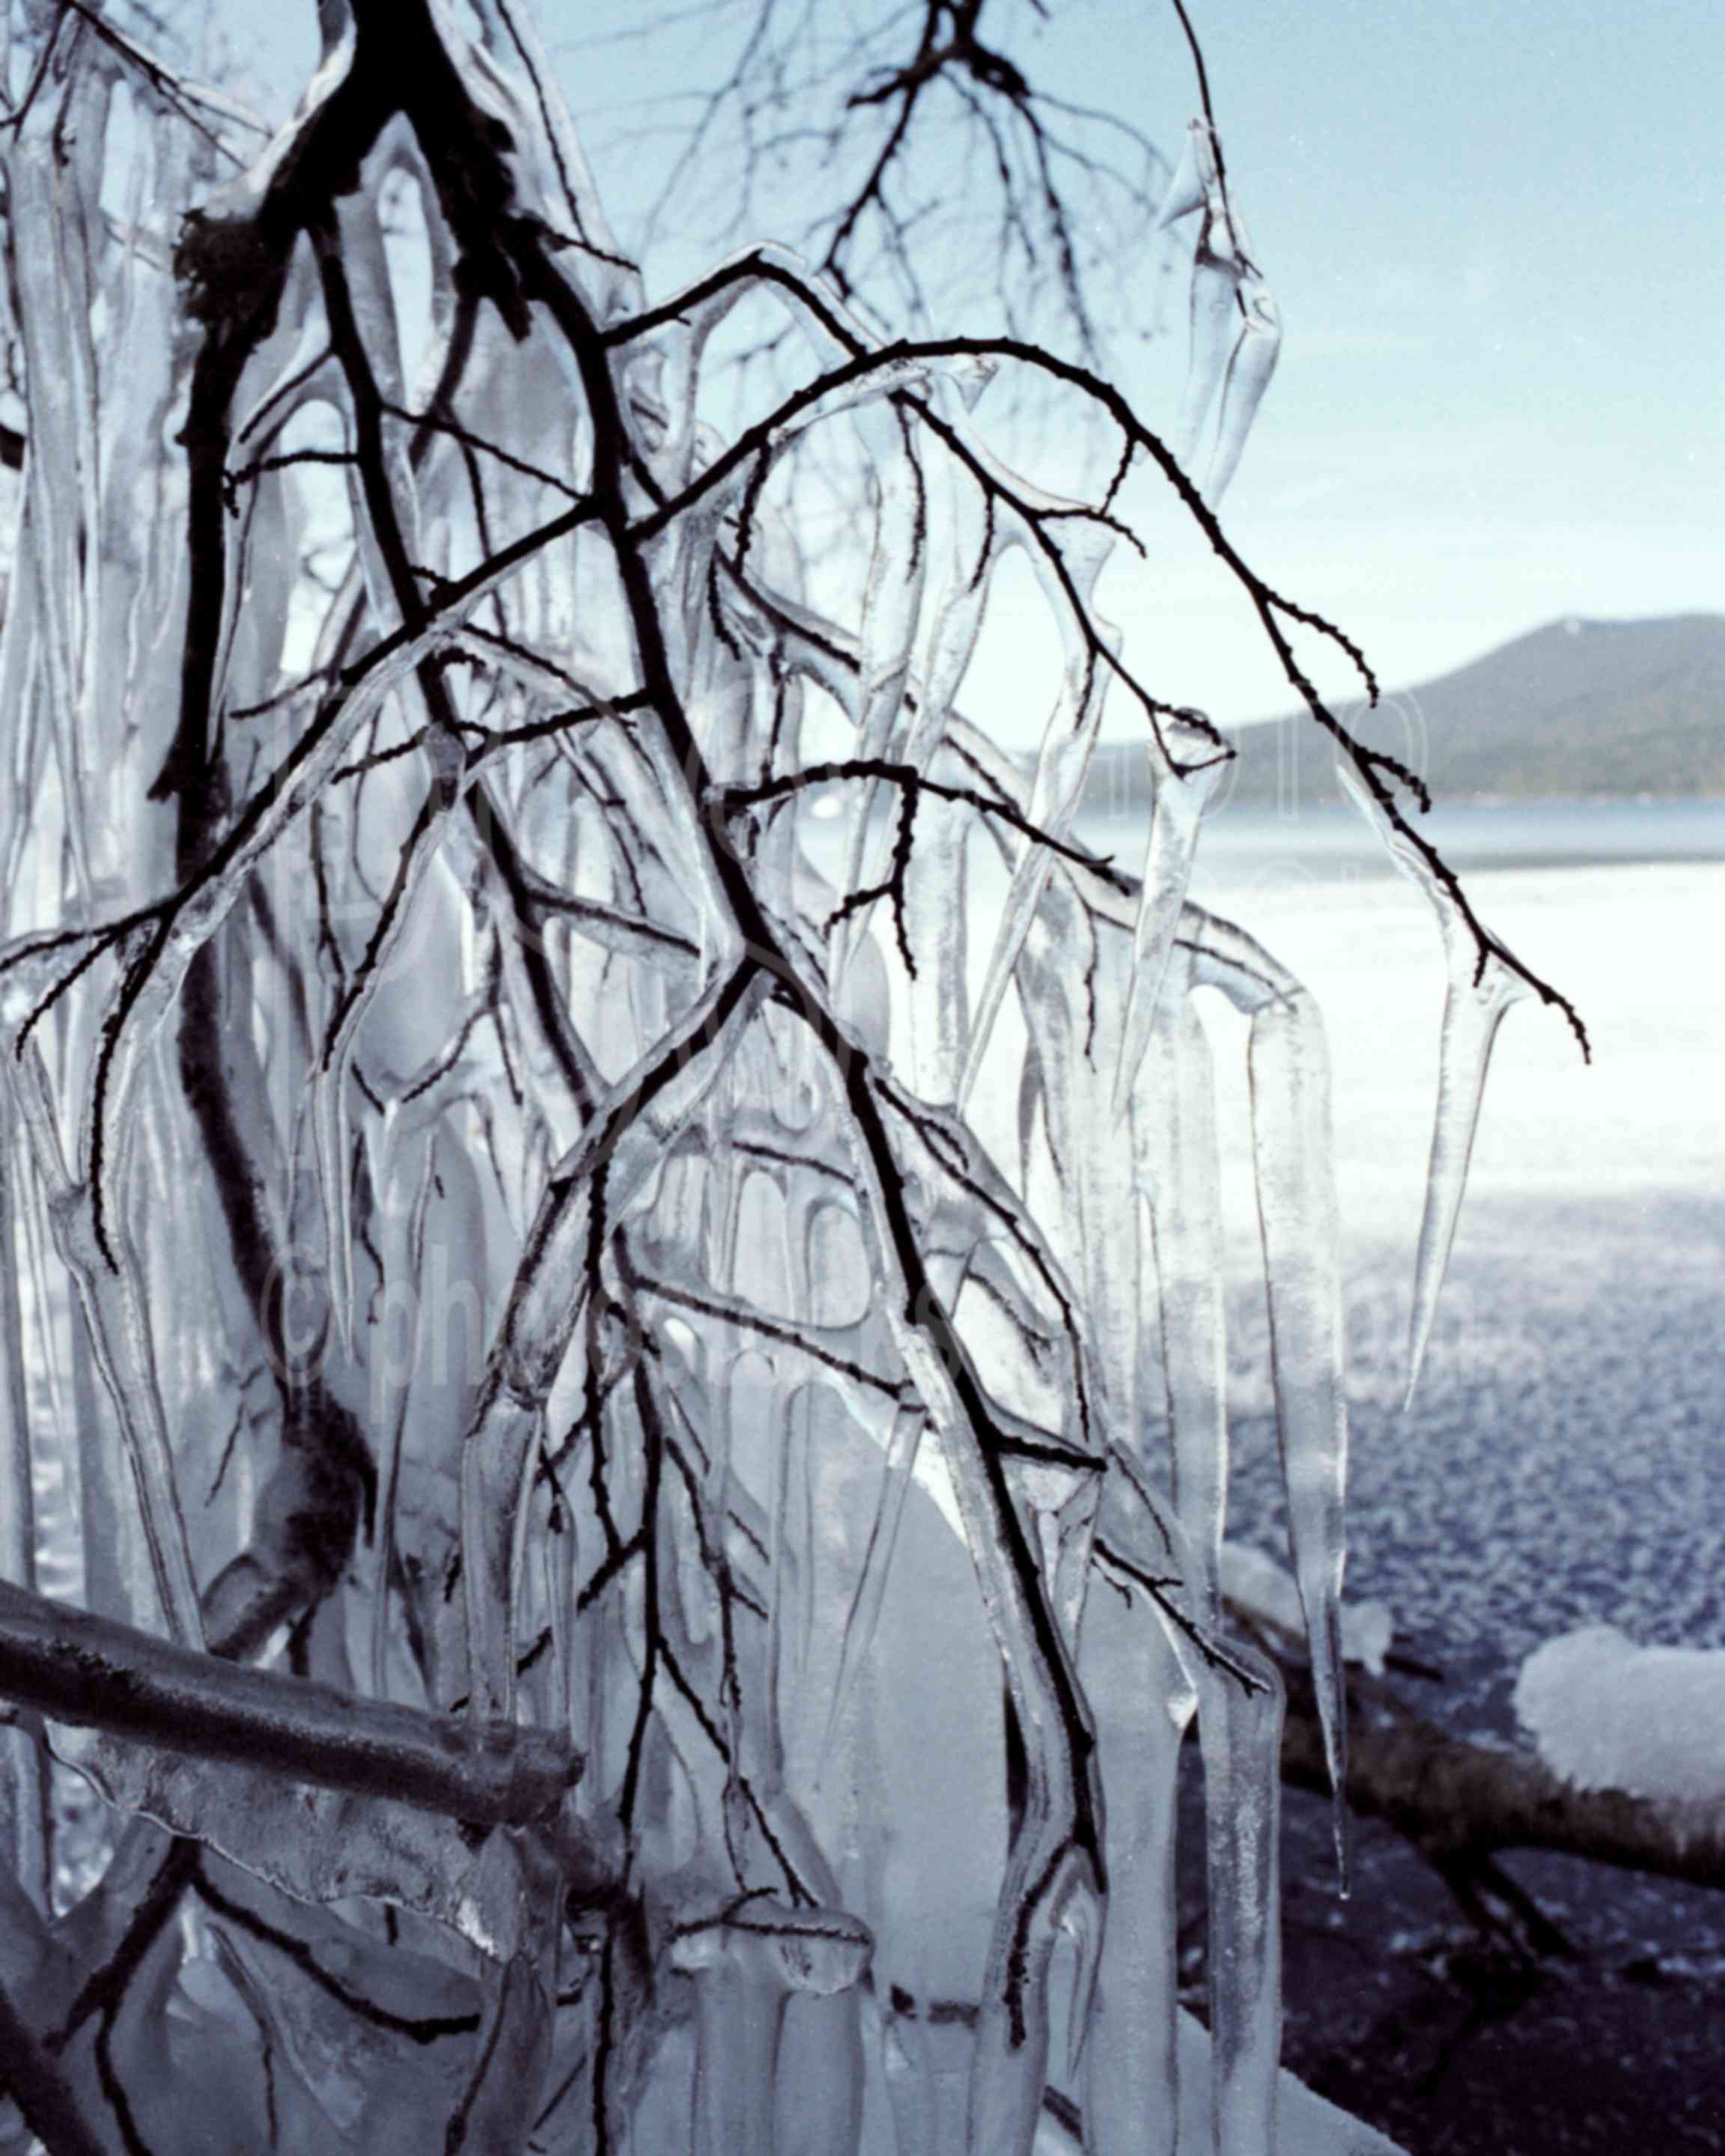 Icecycles,ices,icecycle,odell lake,usas,lakes rivers